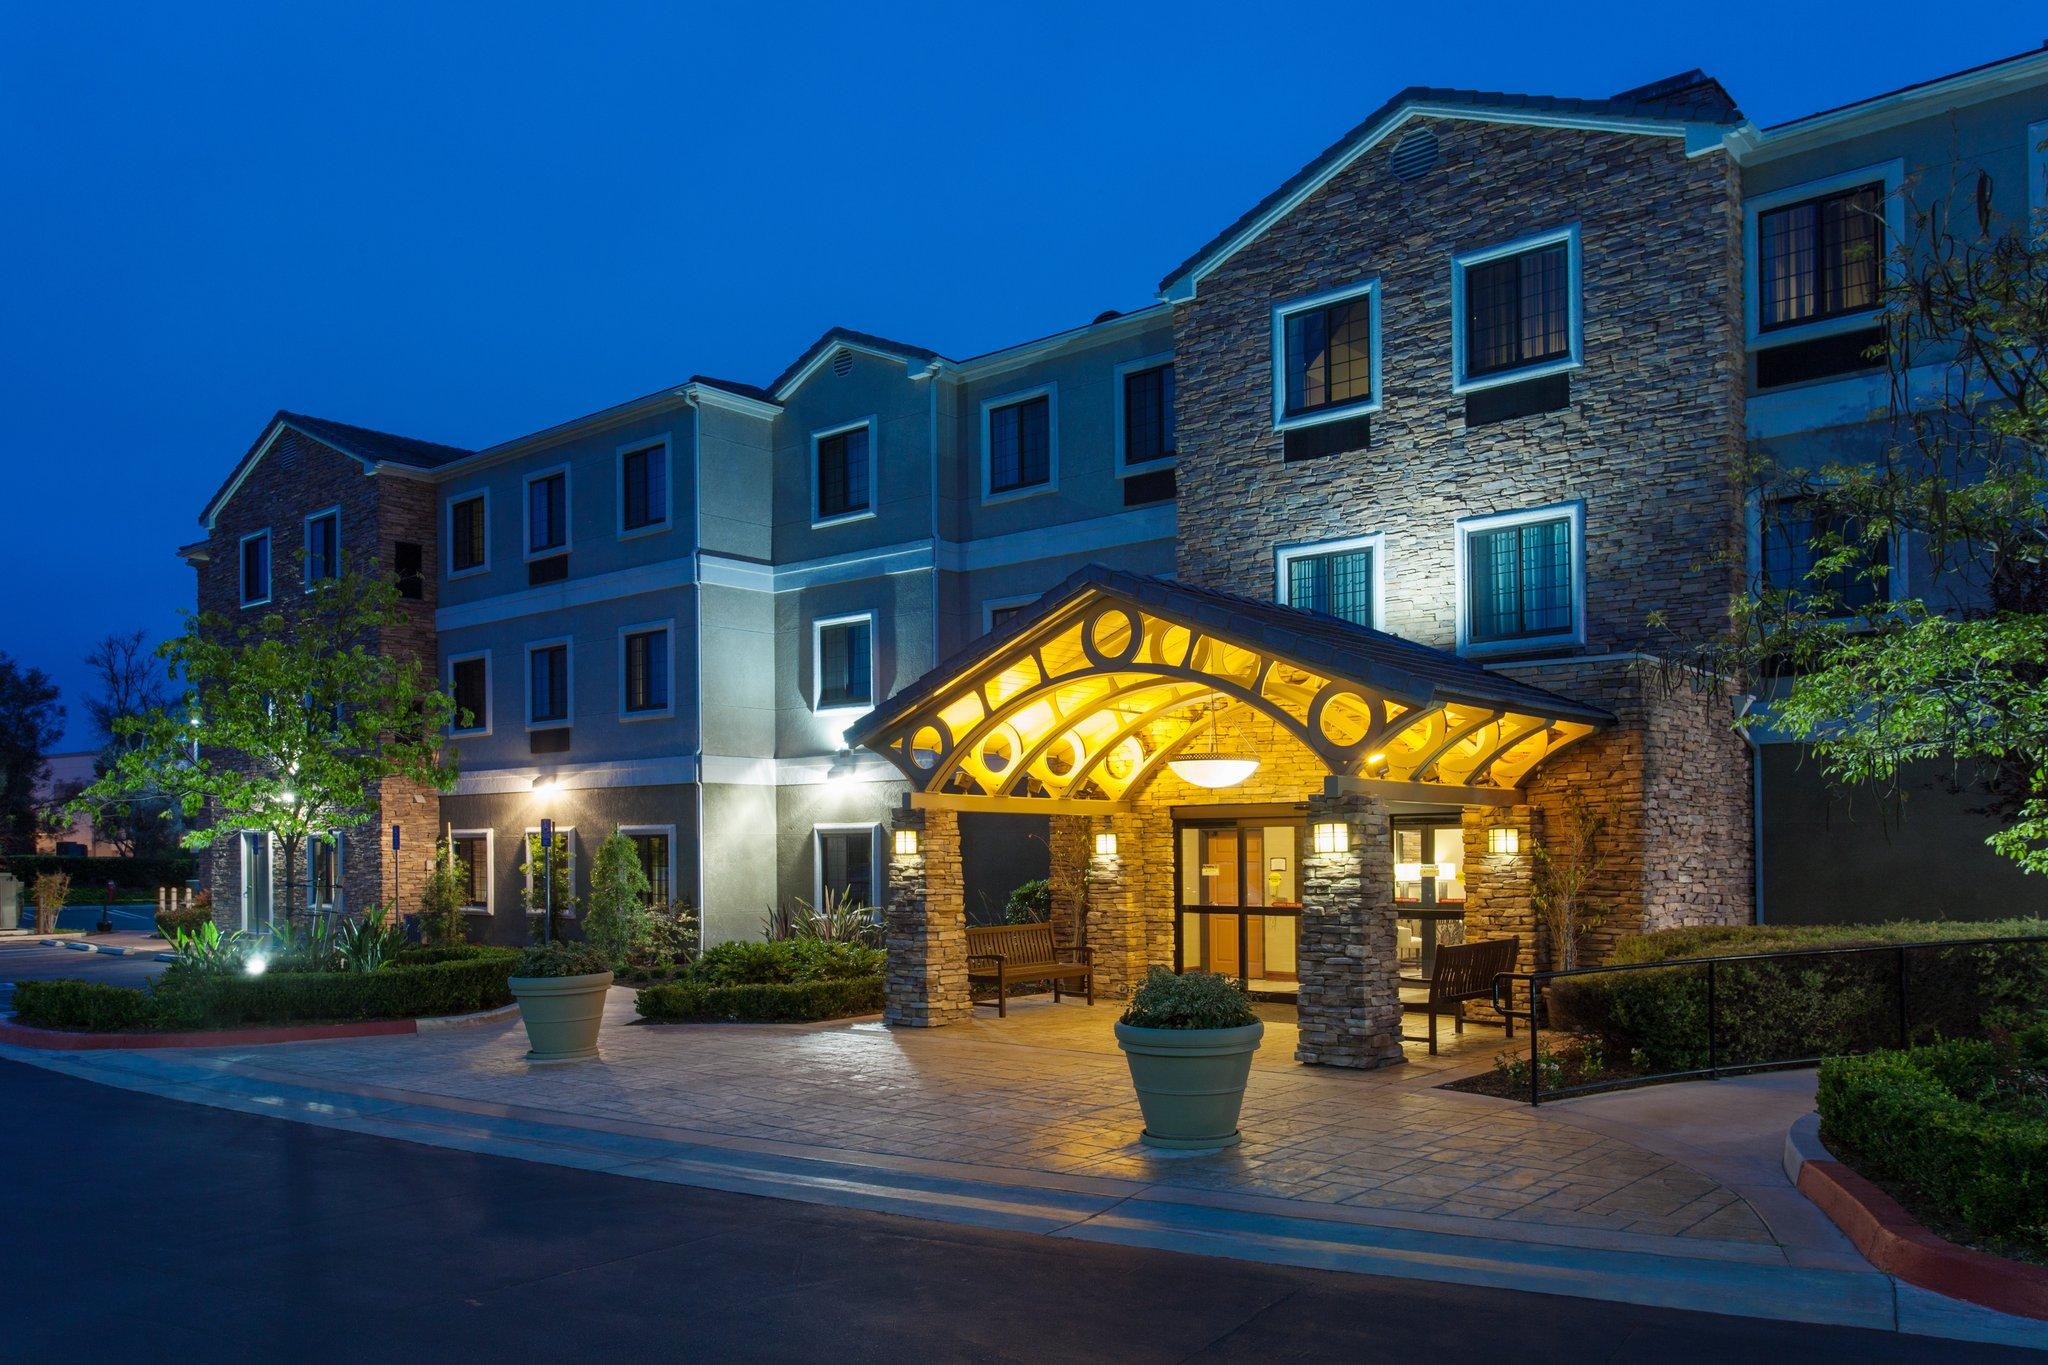 Staybridge Suites Irvine East/Lake Forest in Lake Forest, CA